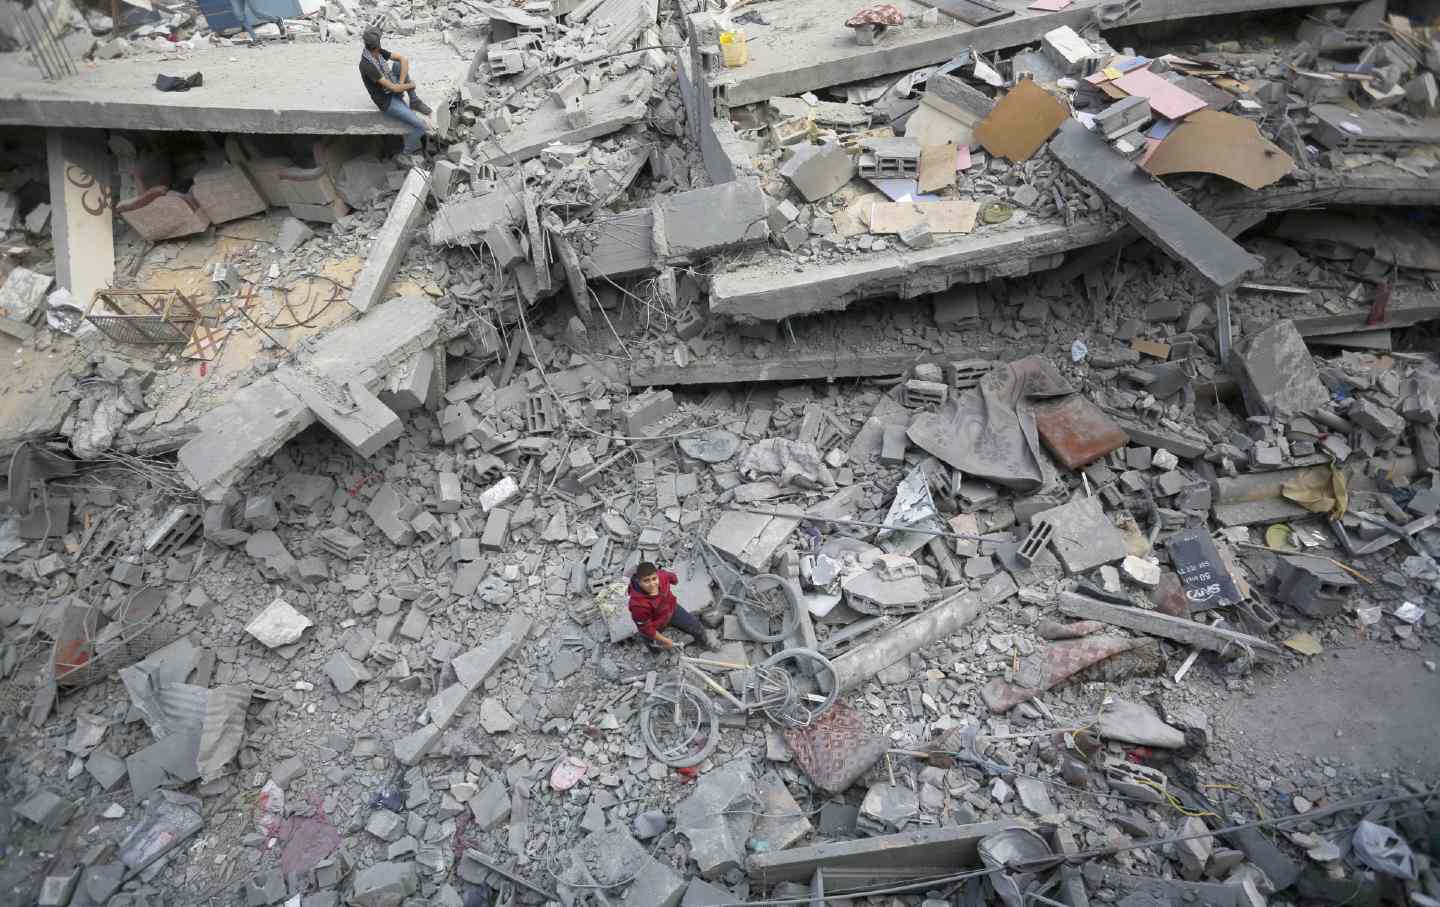 Palestinians in a destroyed residential area try to collect usable items under the rubble.